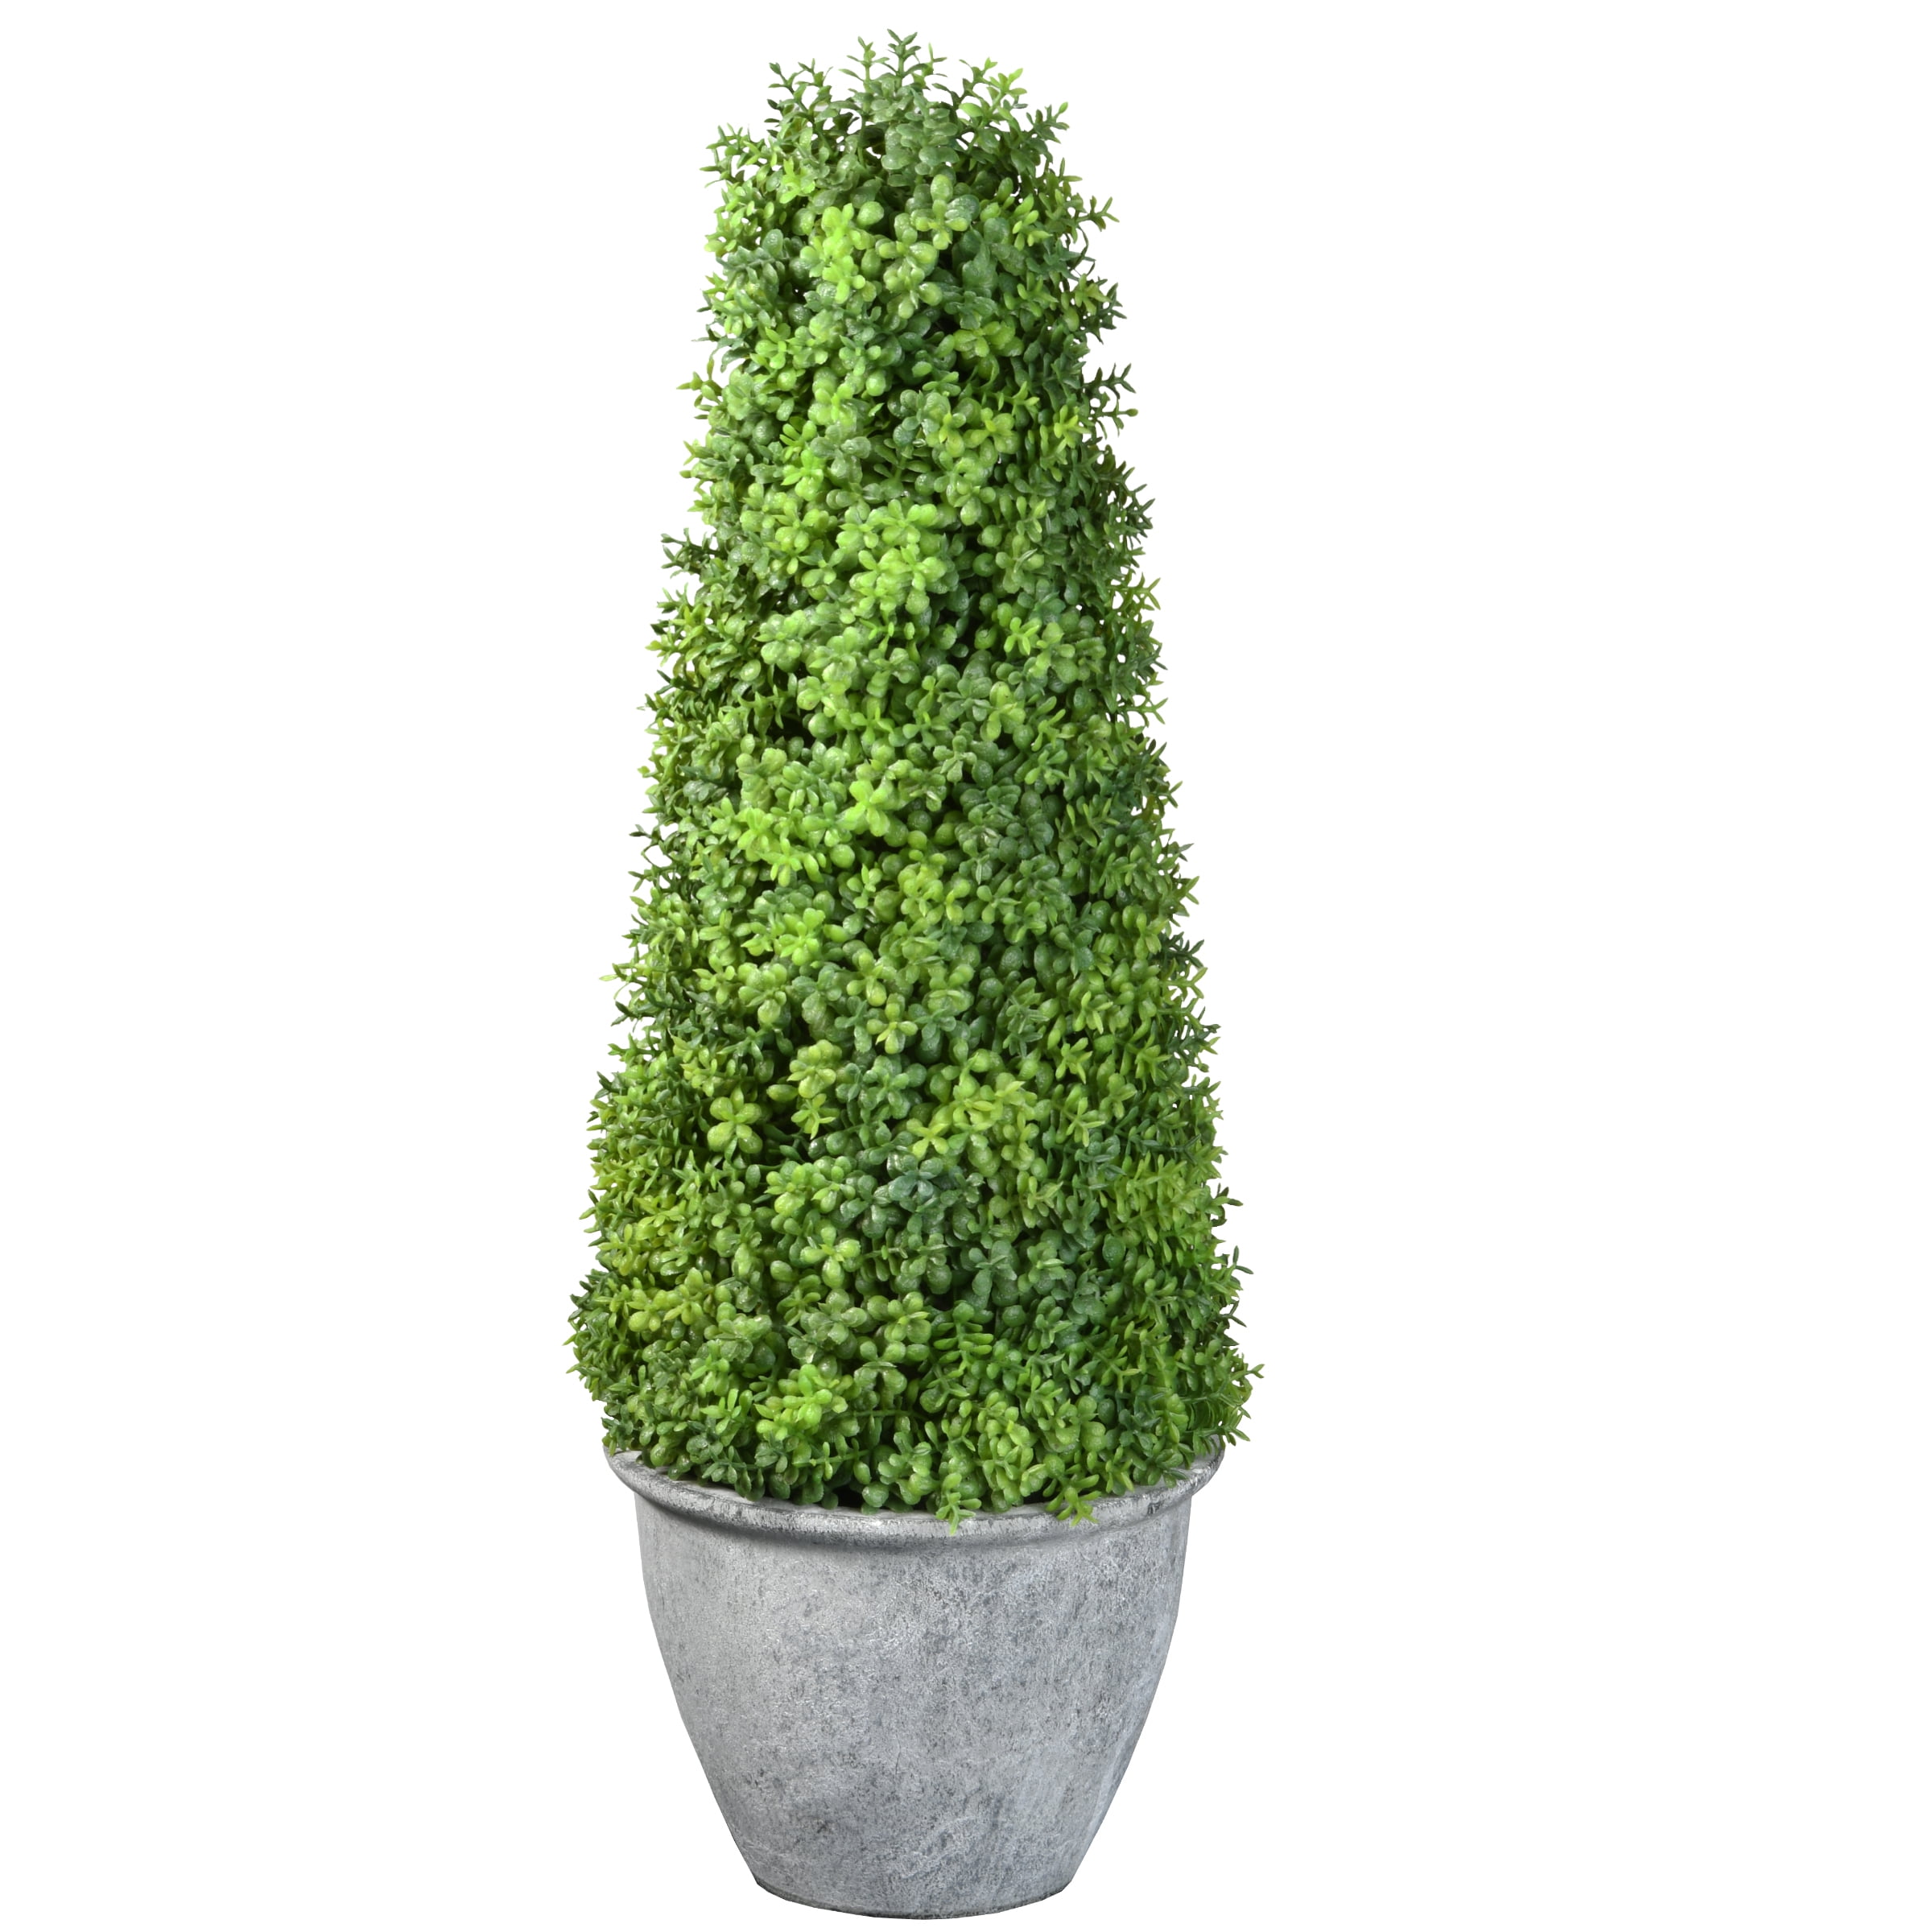 8" Inch Artificial ivy Topiary Ball Lifelike Plants Boxwood Green Decor Cone 